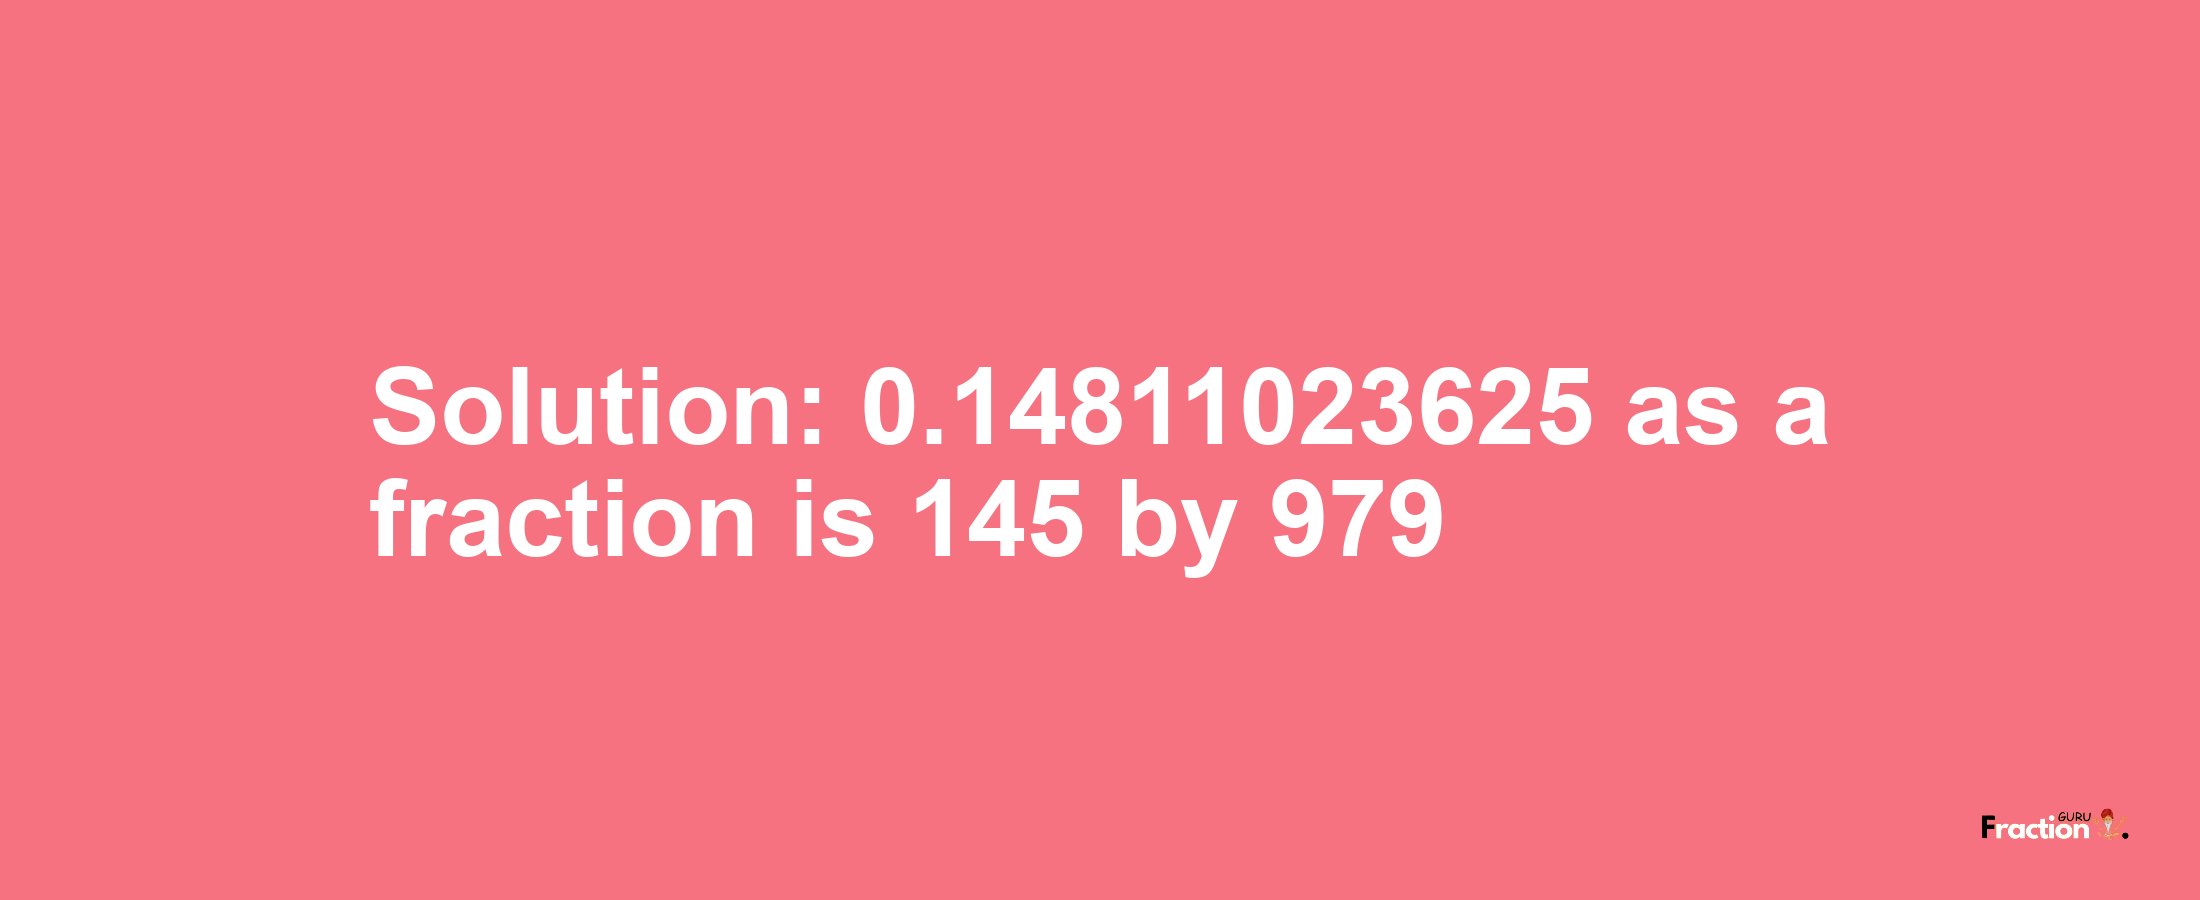 Solution:0.14811023625 as a fraction is 145/979